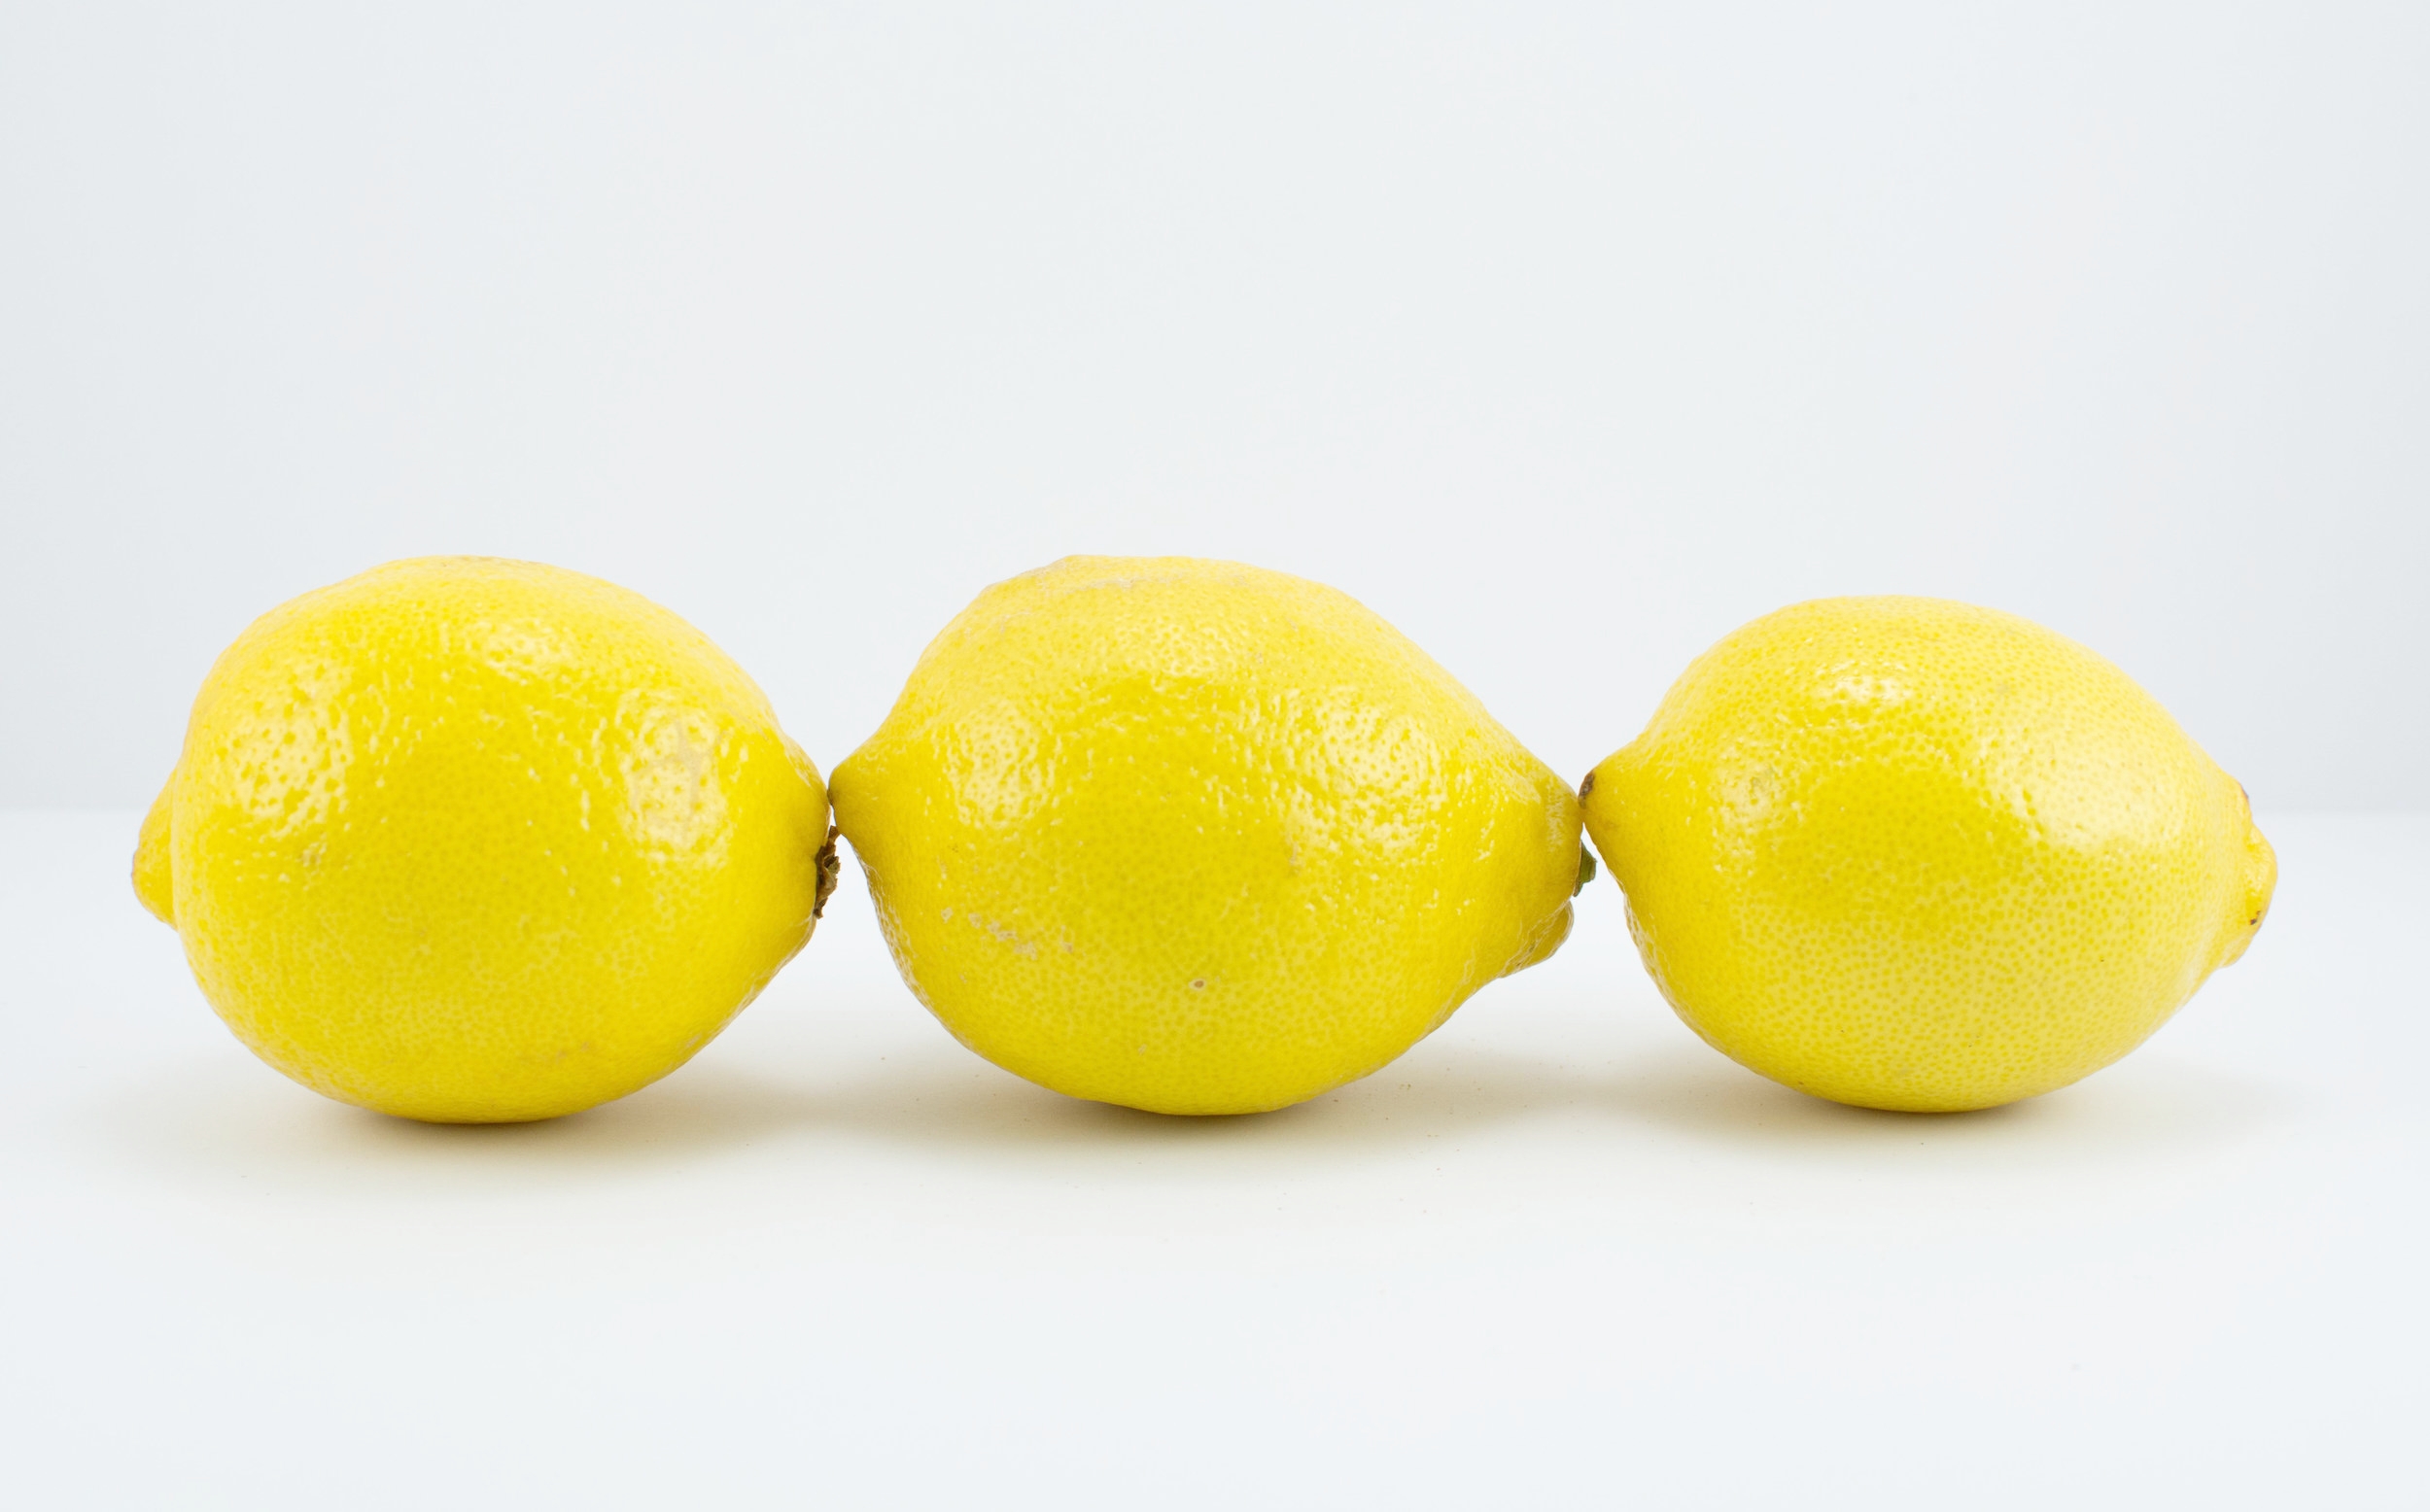  Holly Coulis,  Three Lemons End-to-End  